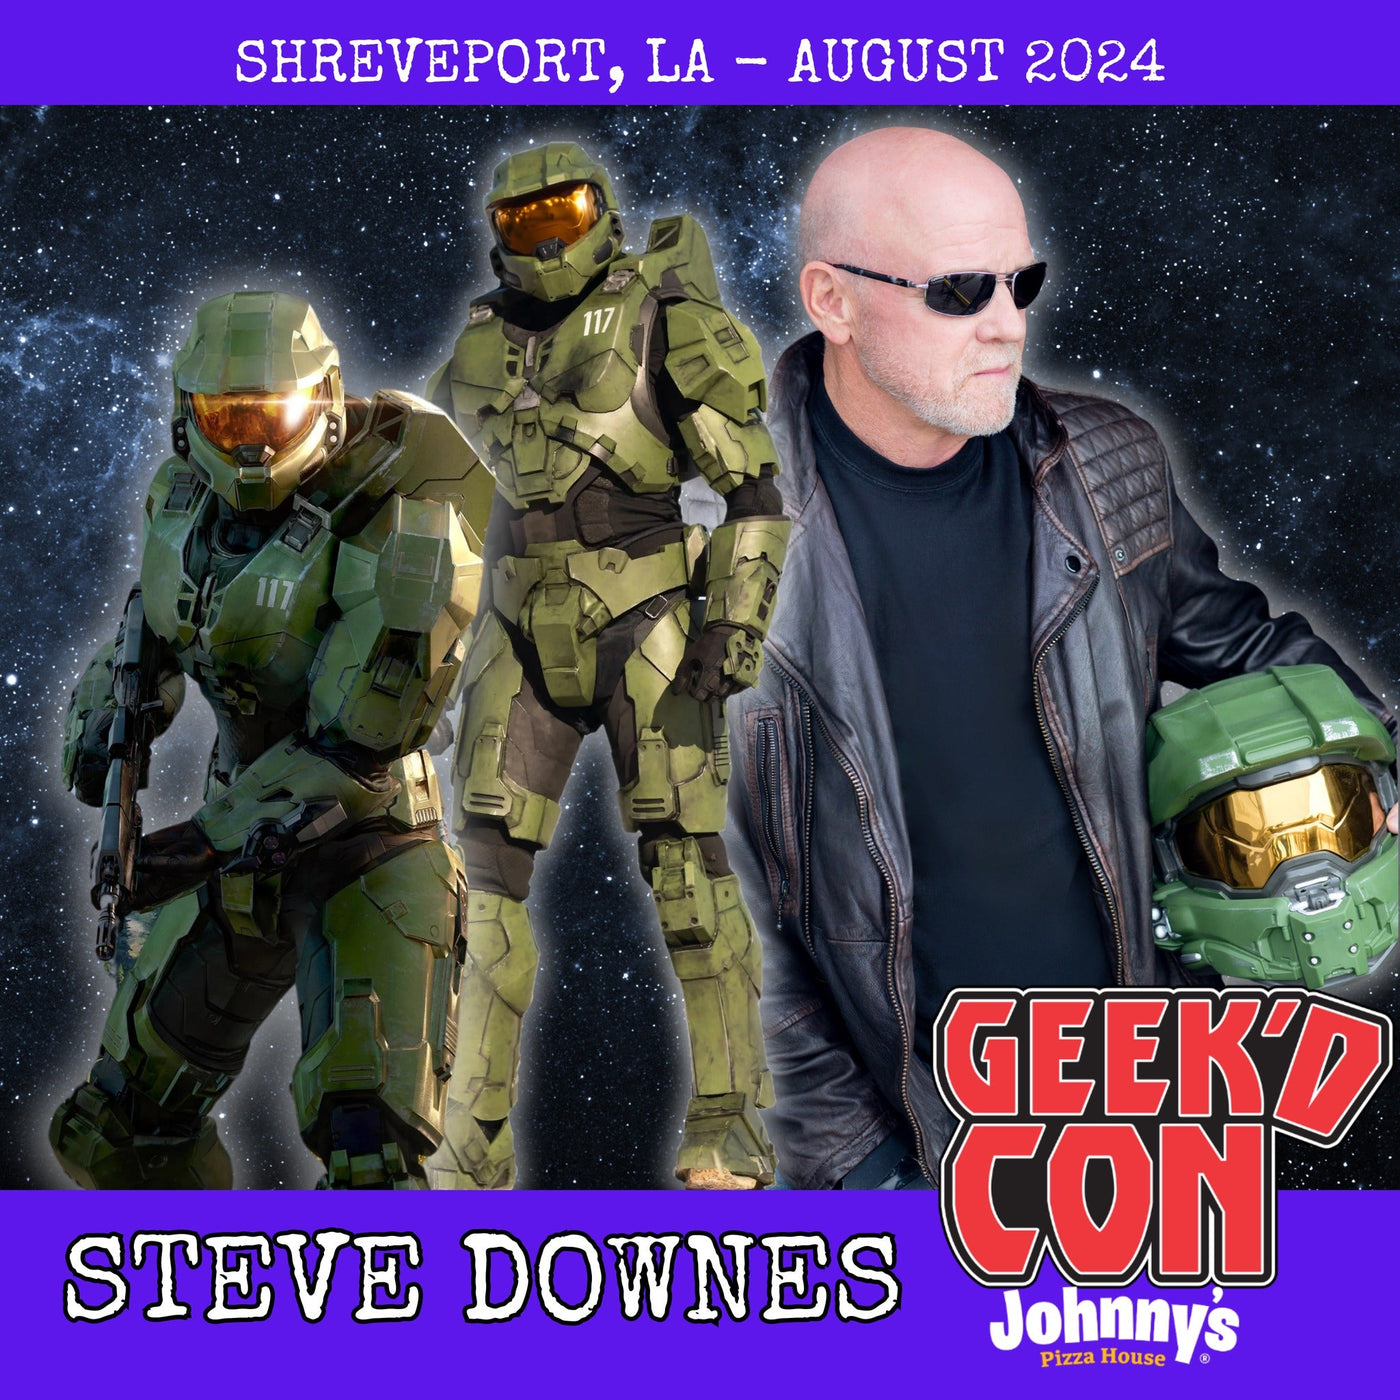 Steve Downes Official Autograph Mail-In Service - Geek'd Con 2024